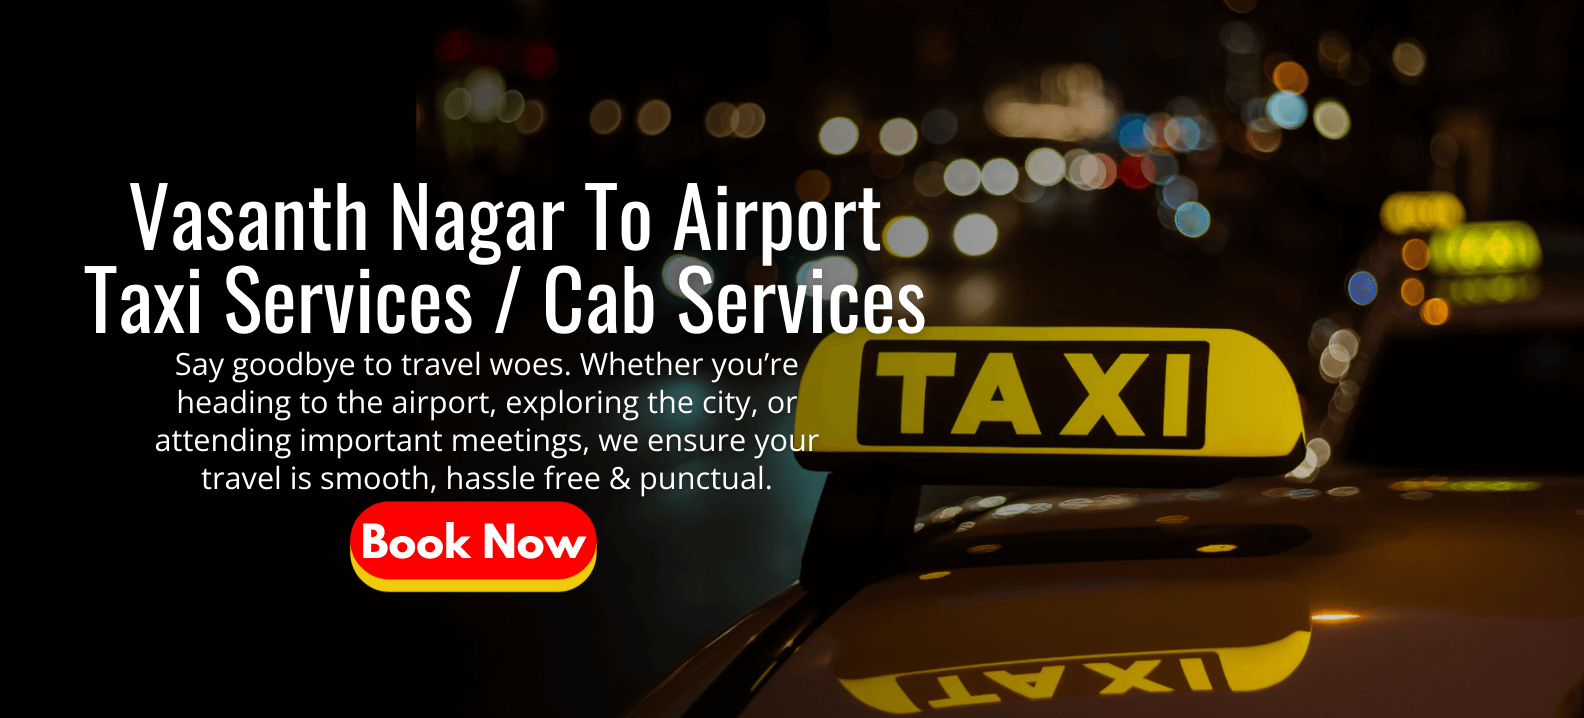 Vasanth Nagar to Airport Taxi Services | Cab Services